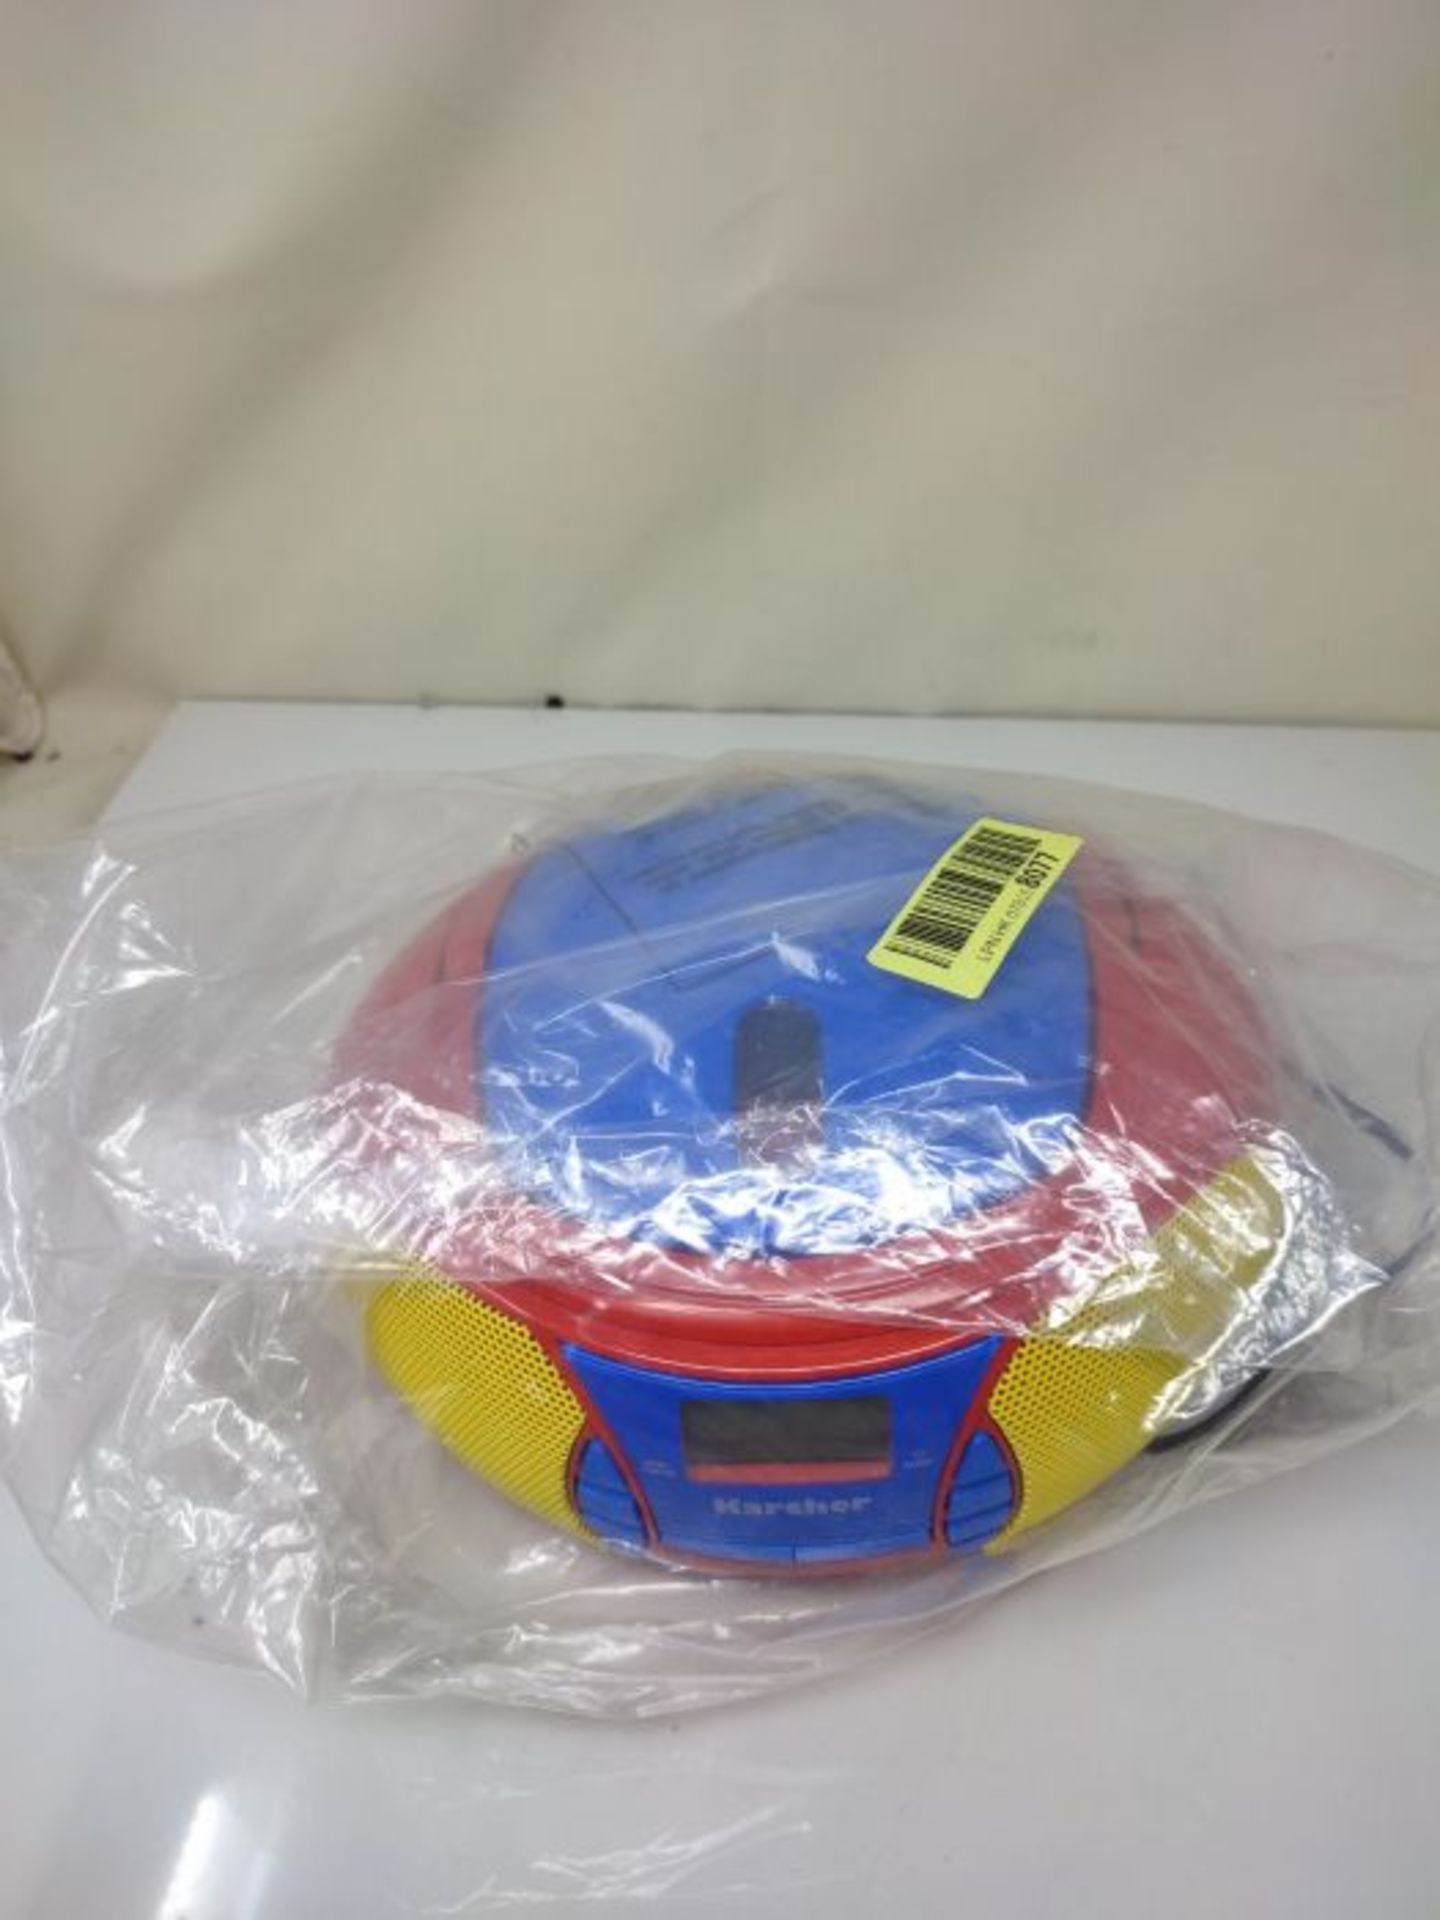 Karcher RR 5026 Portable CD Radio - Colourful Children's Boombox with CD Player, FM Ra - Image 2 of 3